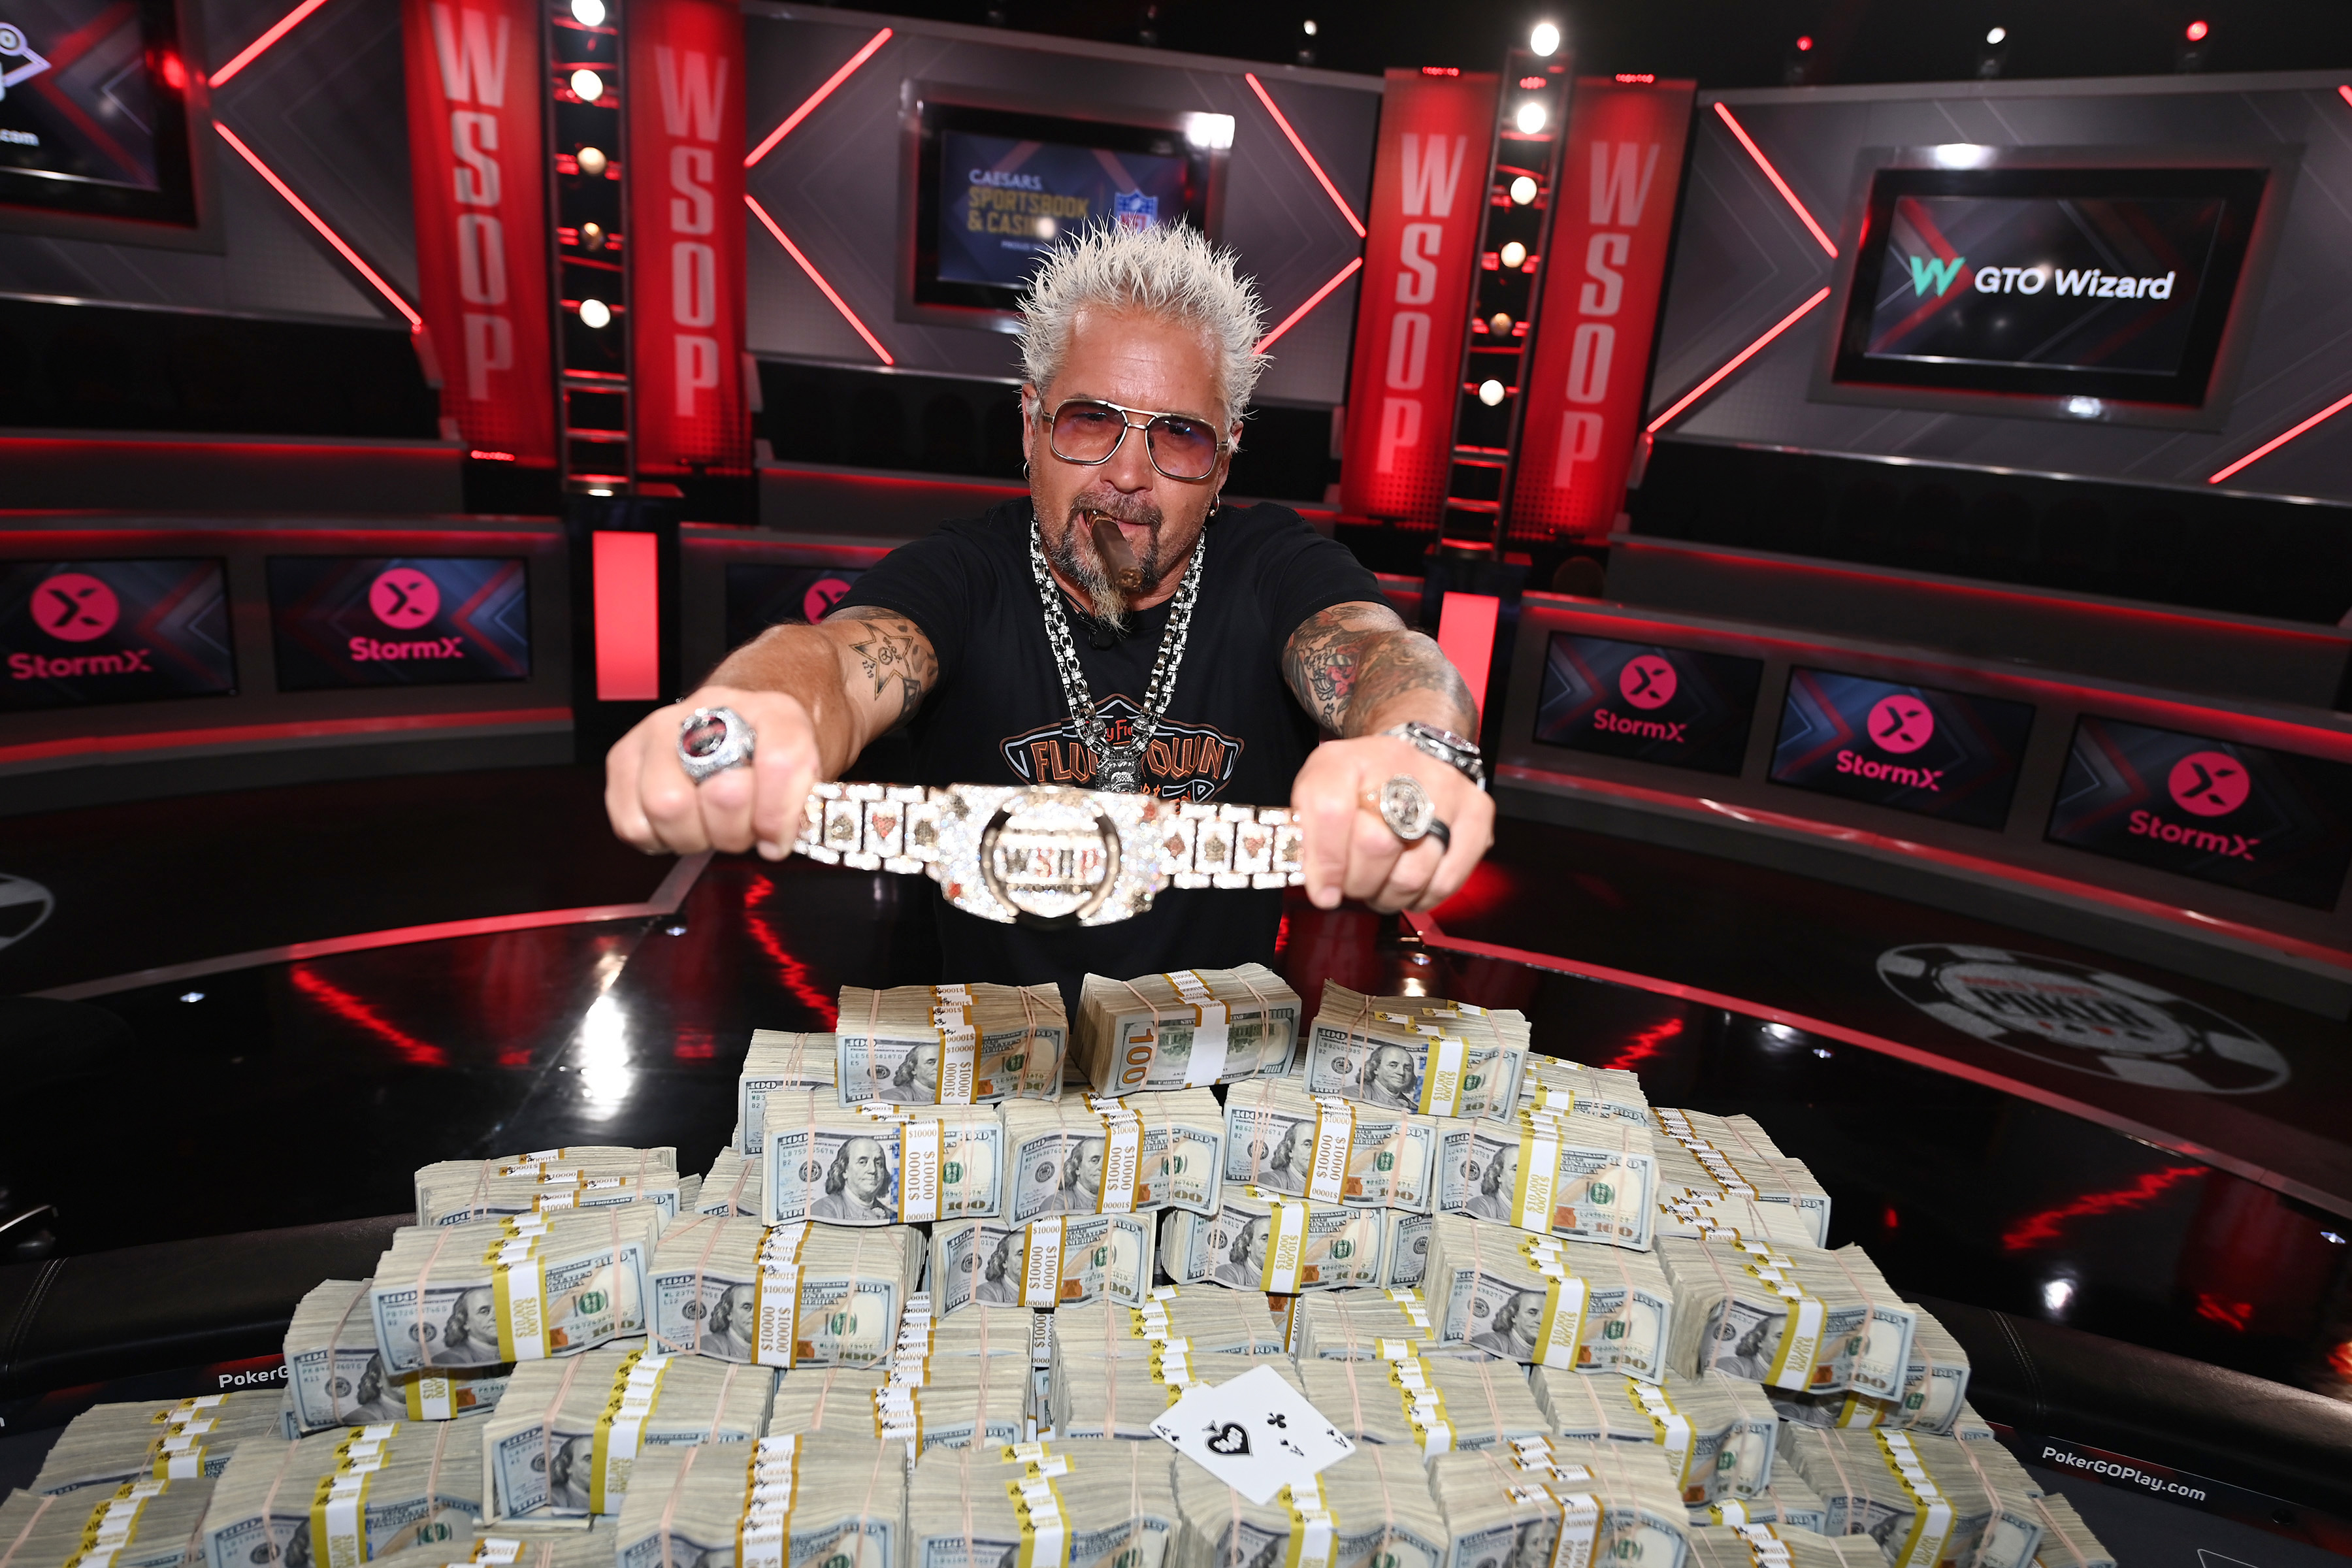 Guy Fieri holding up a winner&#x27;s belt as he stands behind a poker table full of cash with a cigar in his mouth